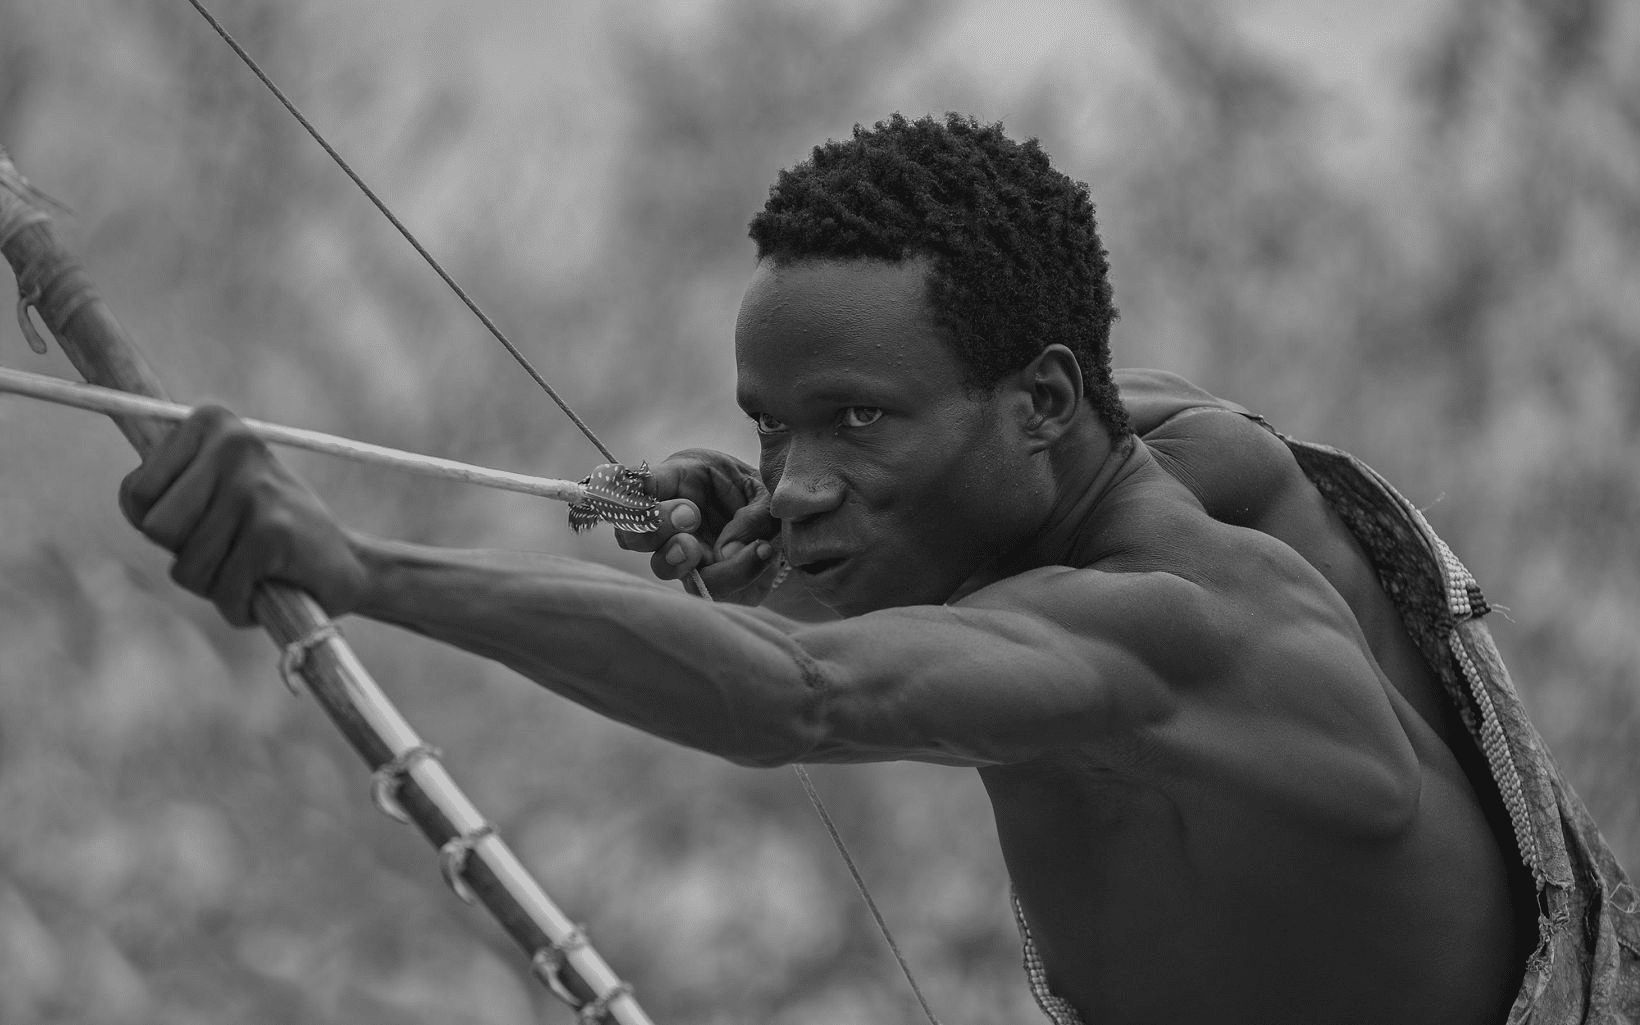 Hadza tribe man practising shooting with an arrow